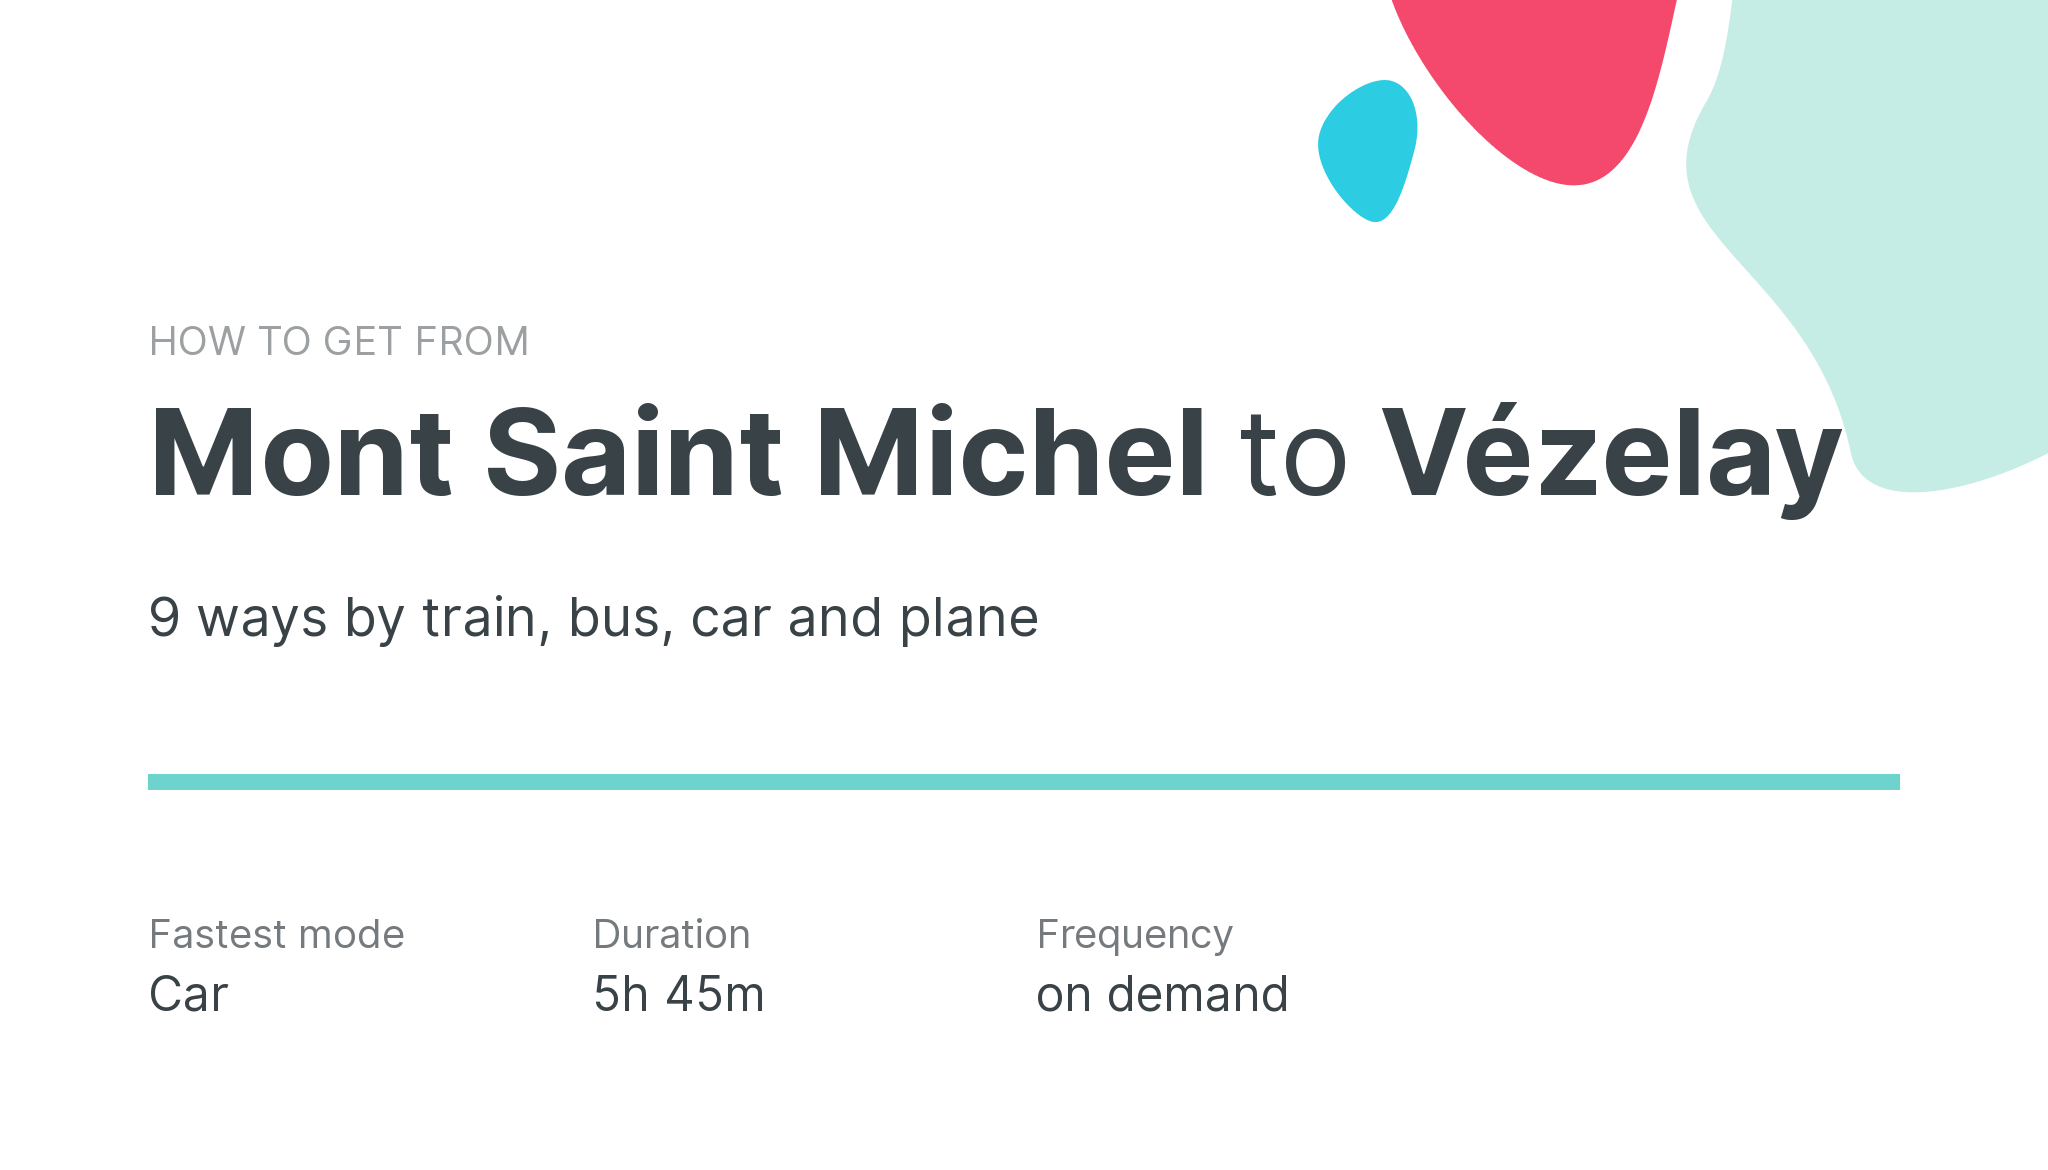 How do I get from Mont Saint Michel to Vézelay